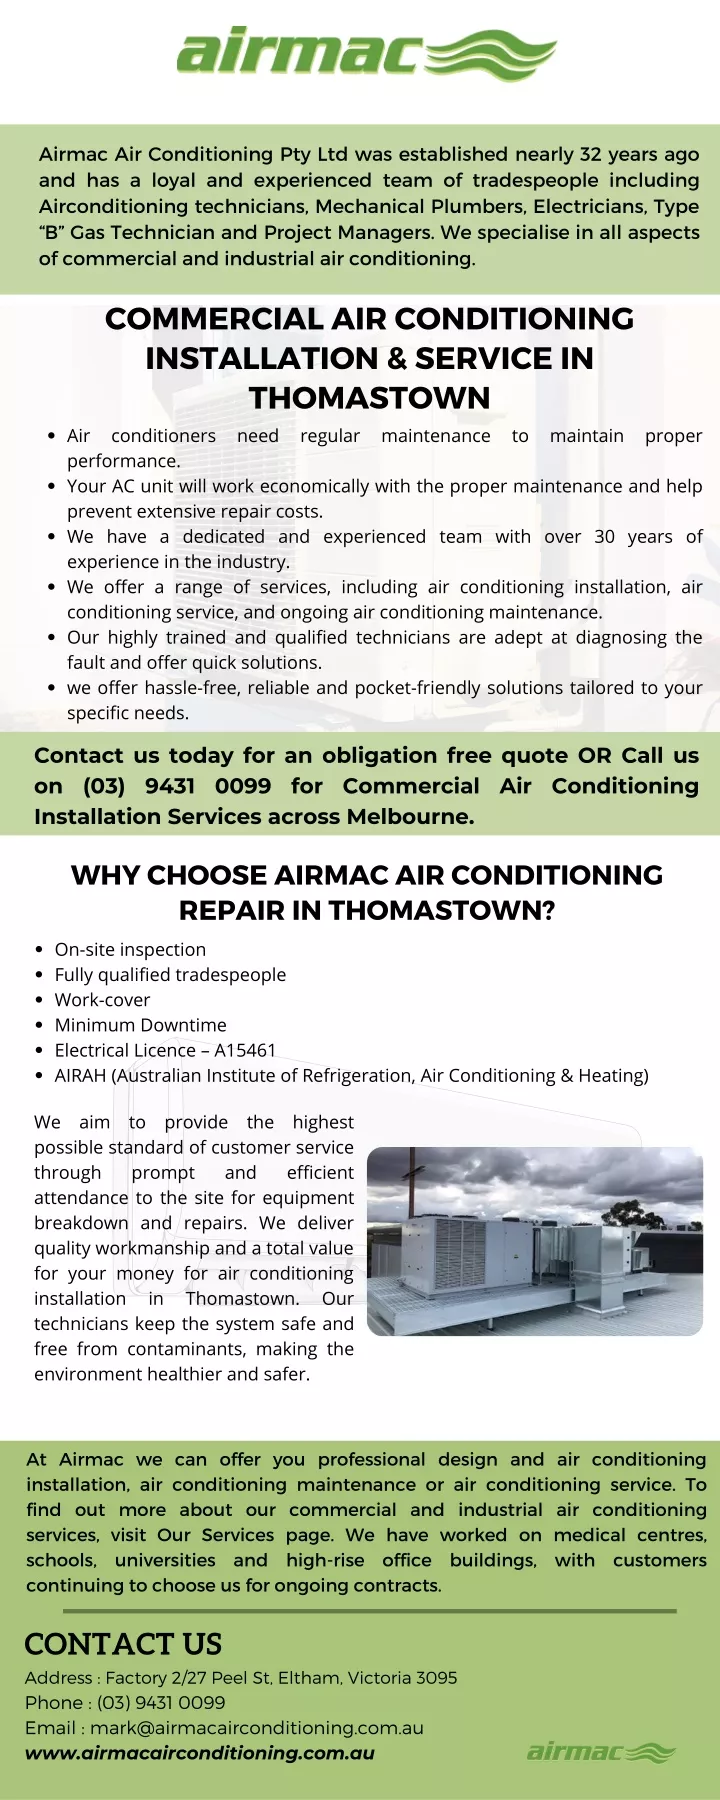 airmac air conditioning pty ltd was established